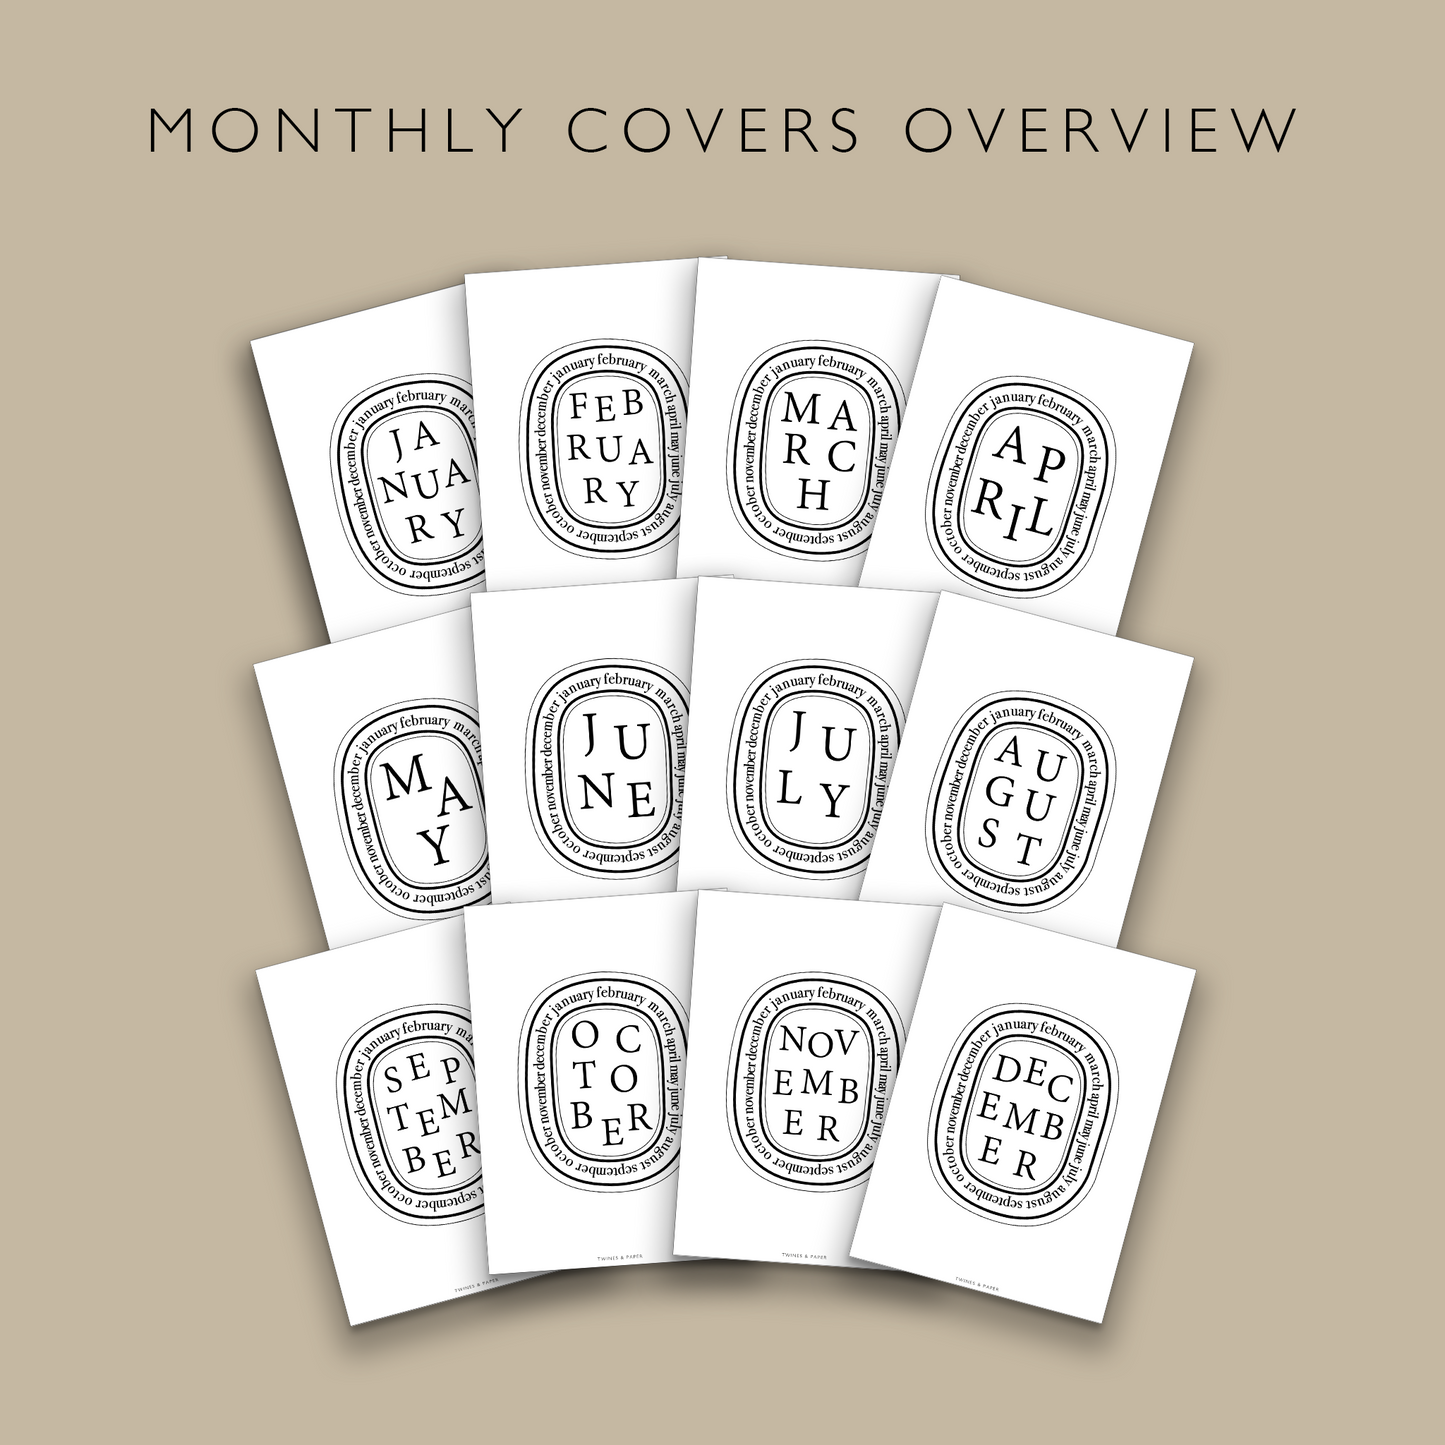 "Diptyque Inspired Monthly Covers" Printable Dashboards 12 Dashboards